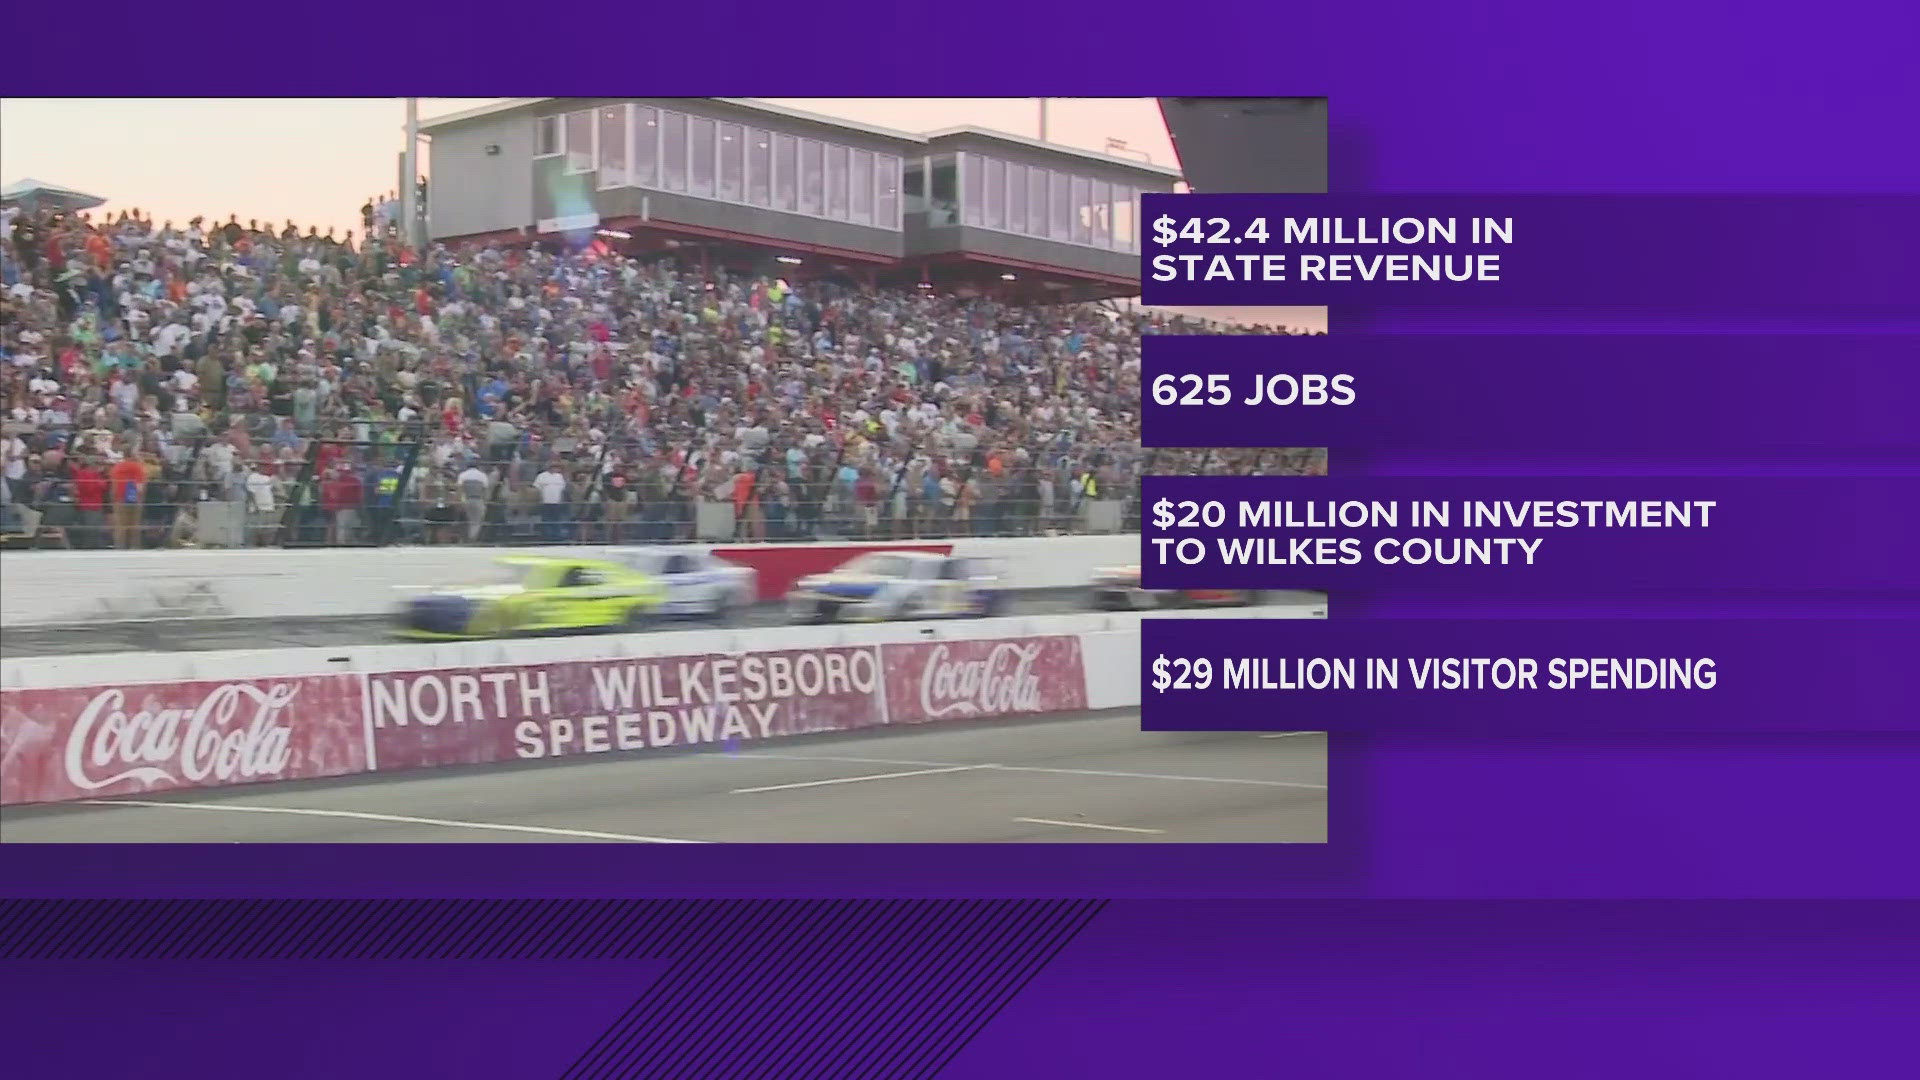 North Wilkesboro Speedway is deeply rooted in the history of NASCAR. It is one of the oldest tracks, hosting a race in NASCAR’s first season in 1948